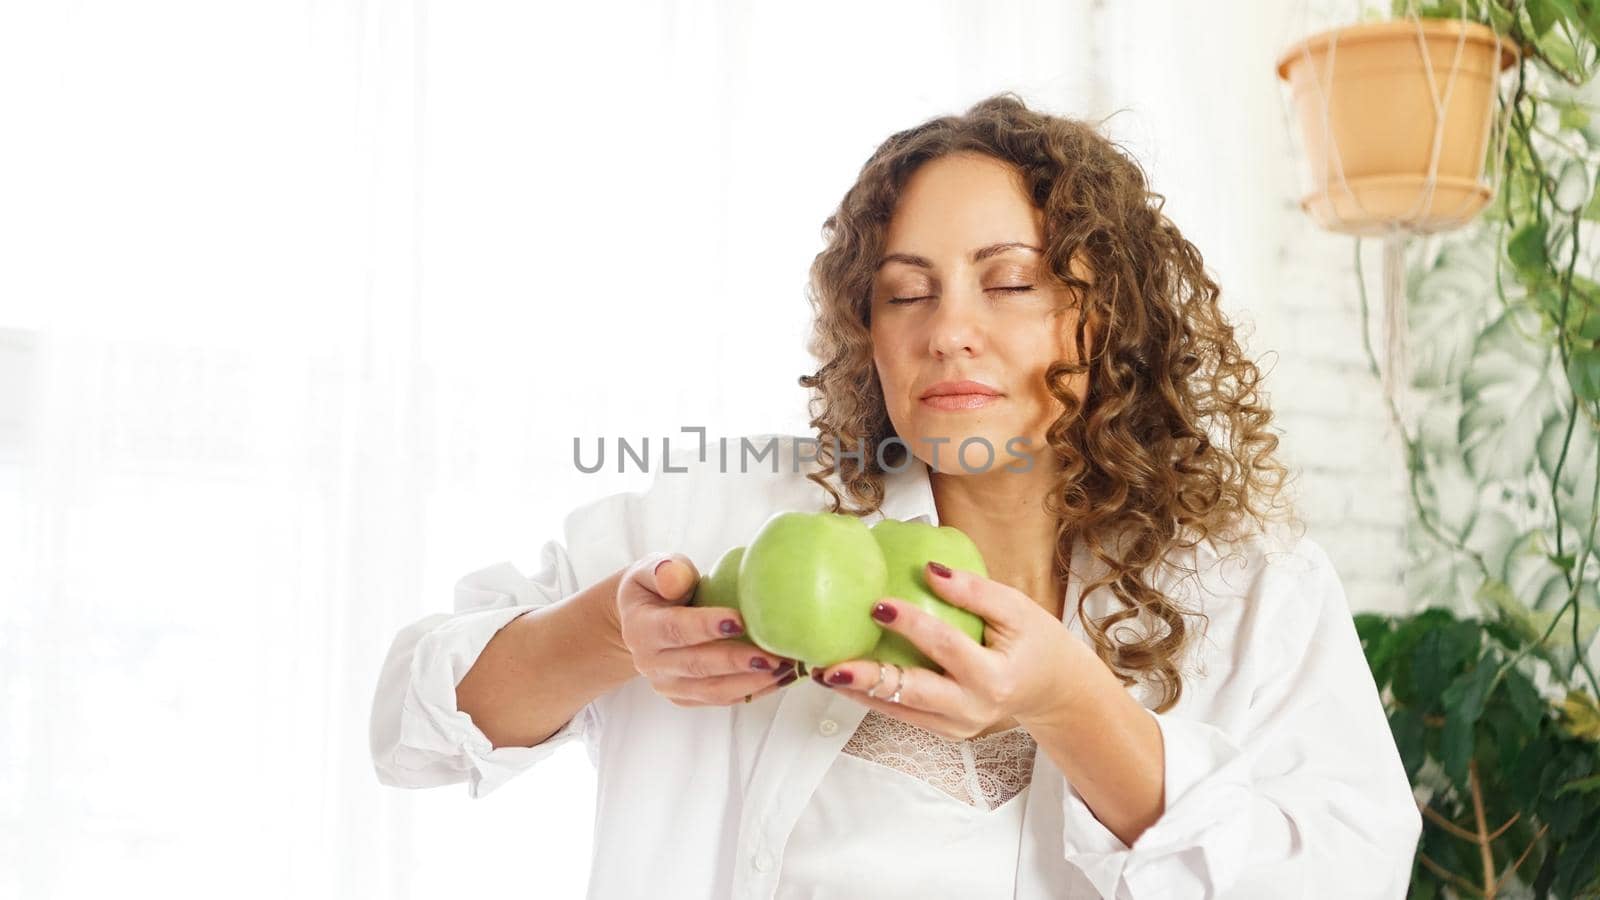 Beautiful young woman with curly hair smelling green apples